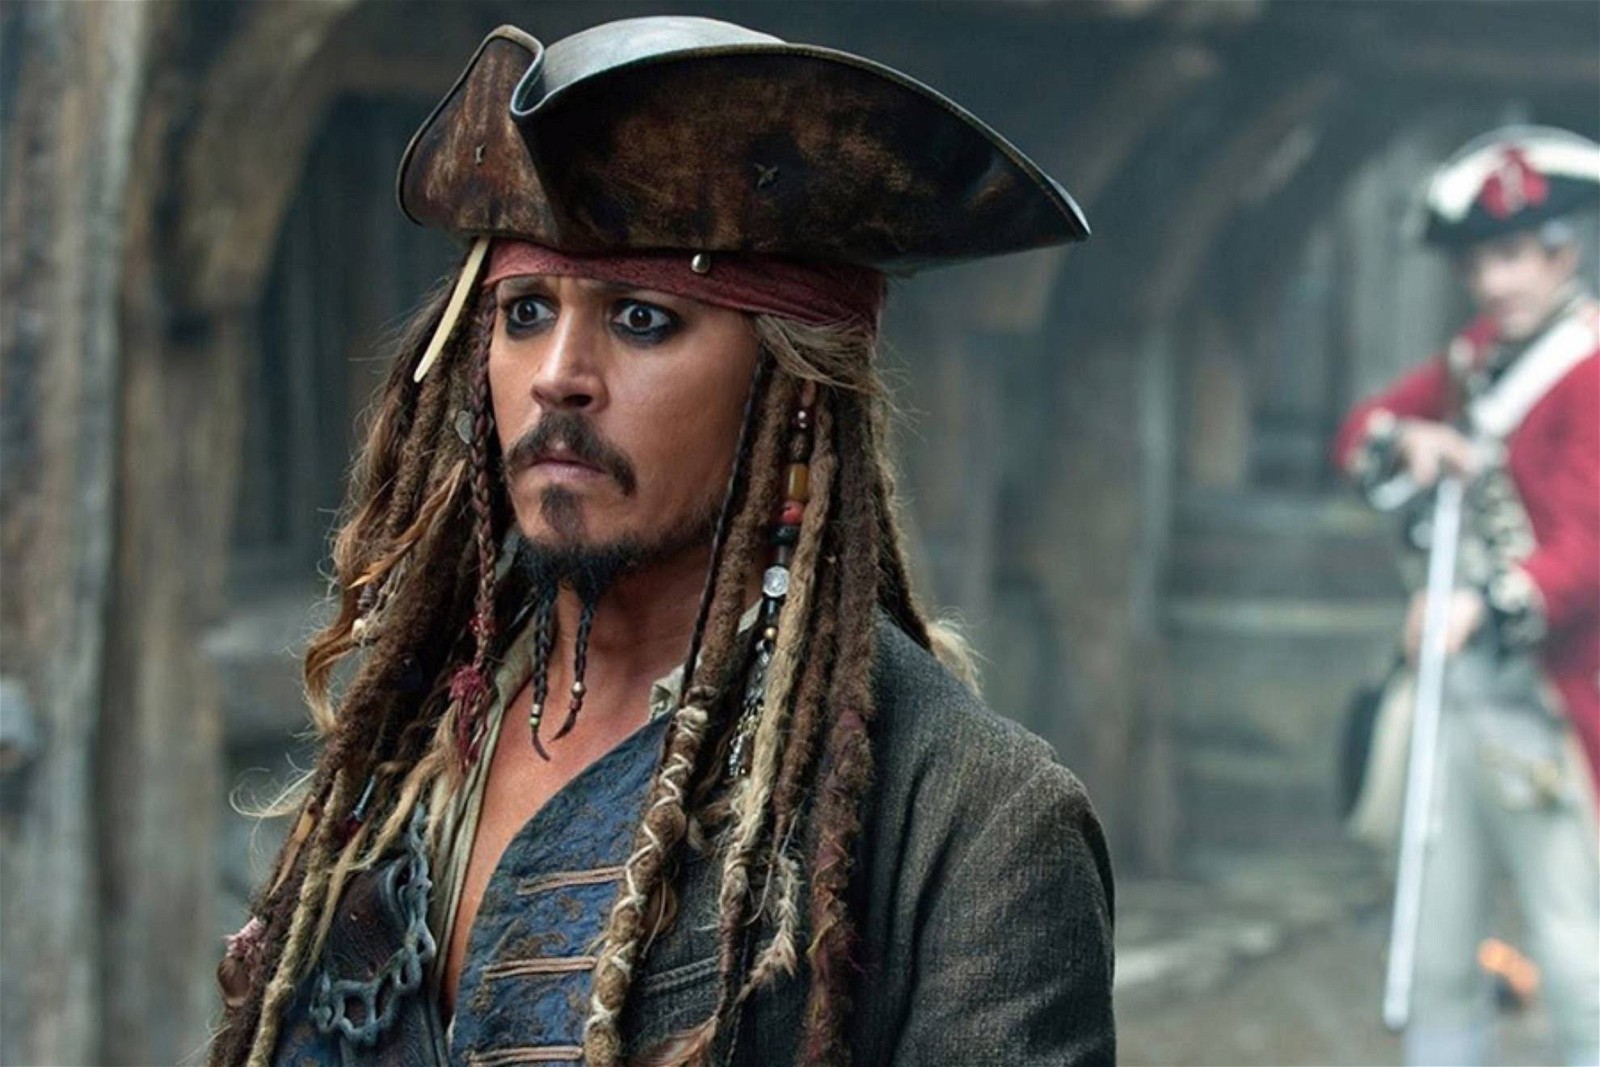 Johnny Depp as Captain Jack Sparrow from the Pirates of The Caribbean series